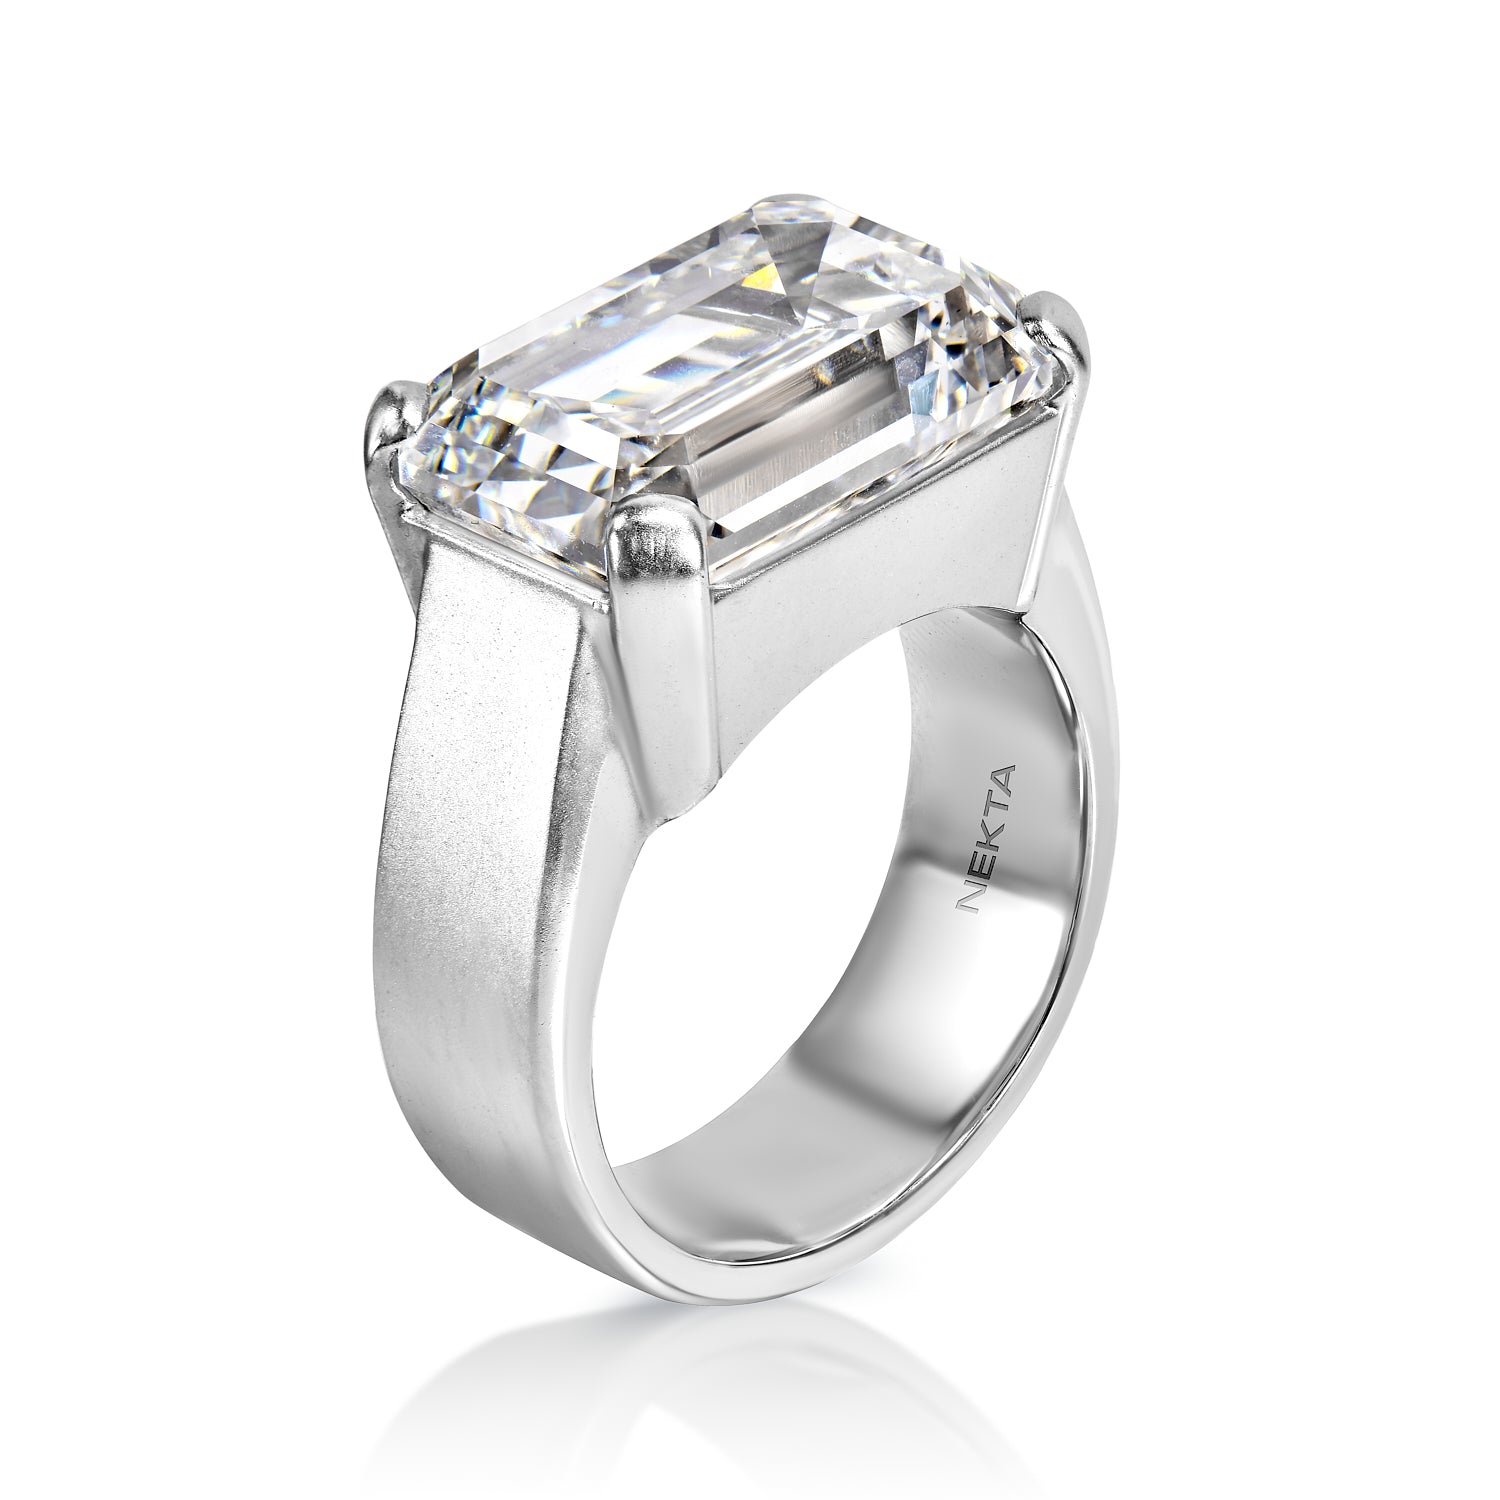 Layna 20 Carat G VS2 Emerald Cut Lab-Grown Diamond Solitaire Engagement Ring Side View